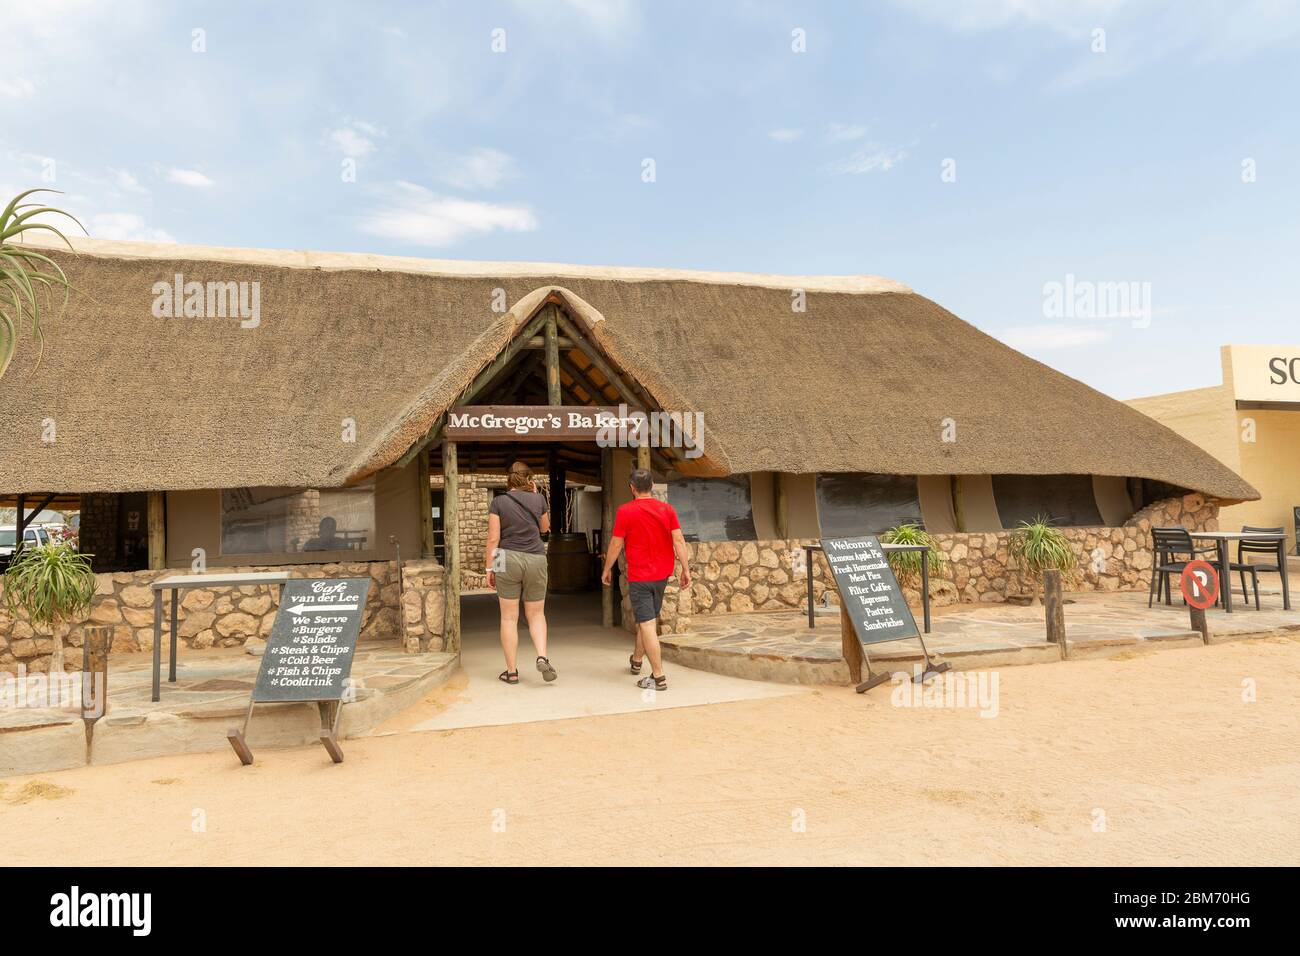 Mc Gregor's Bakery, Solitaire, Namibia Stock Photo